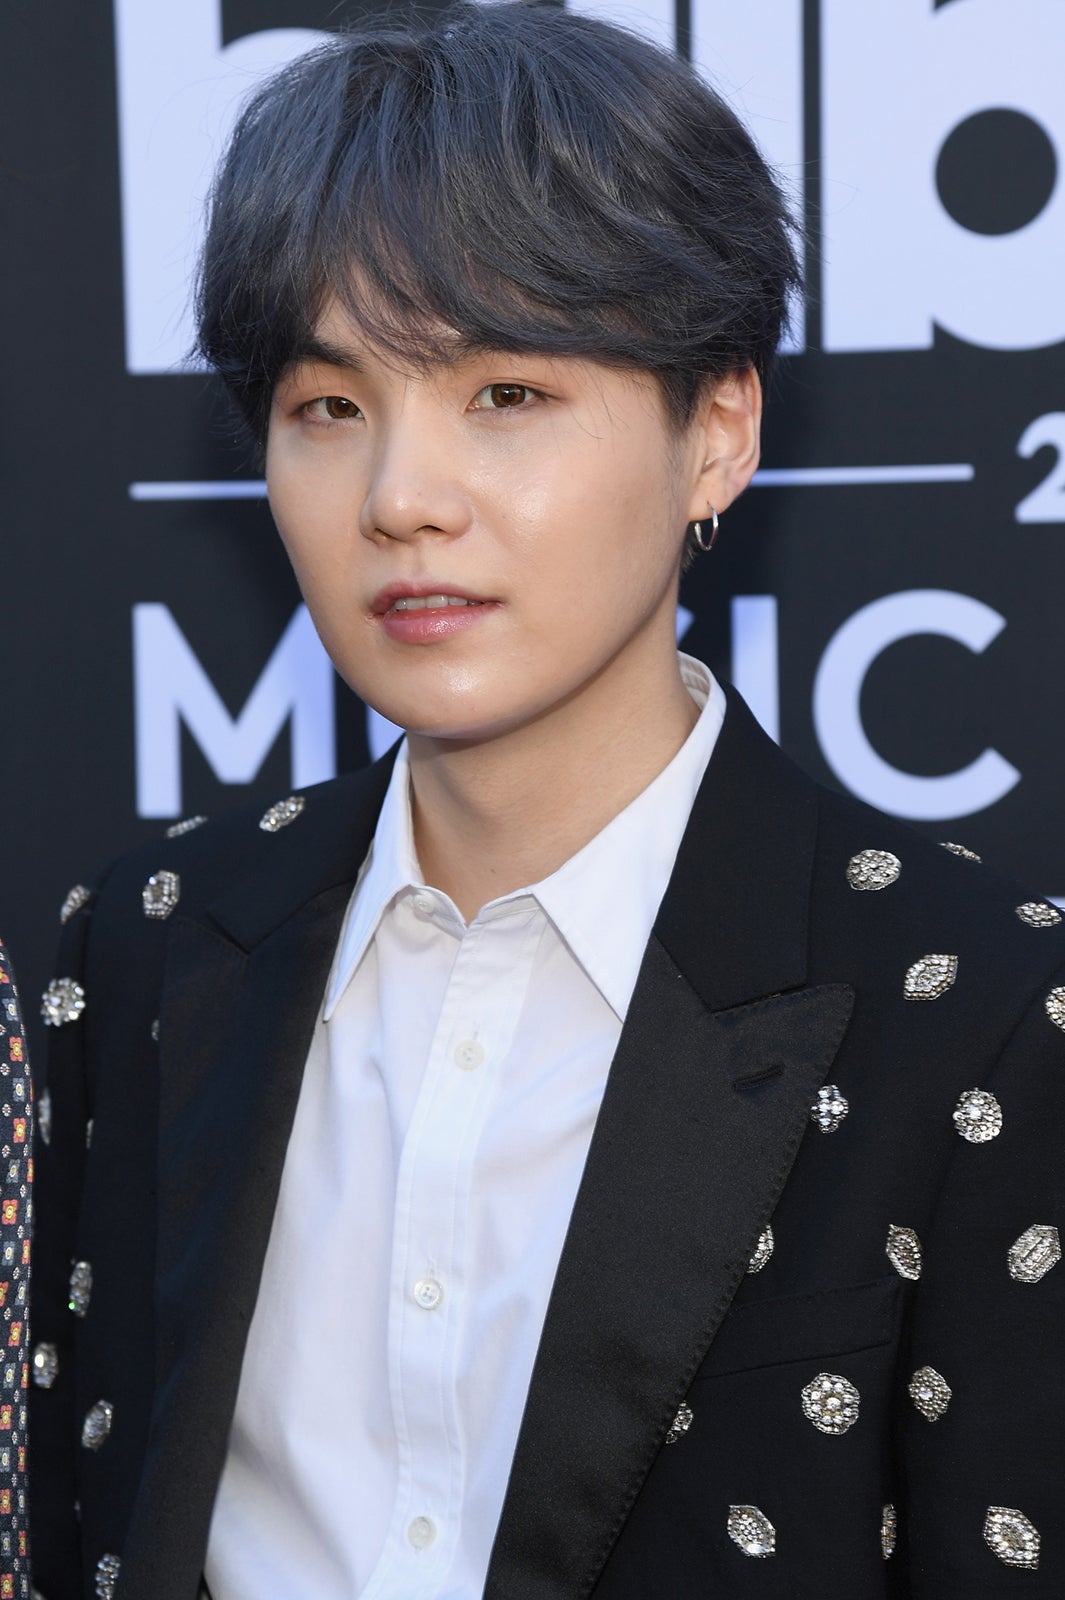 SUGA／photo by Getty Images
